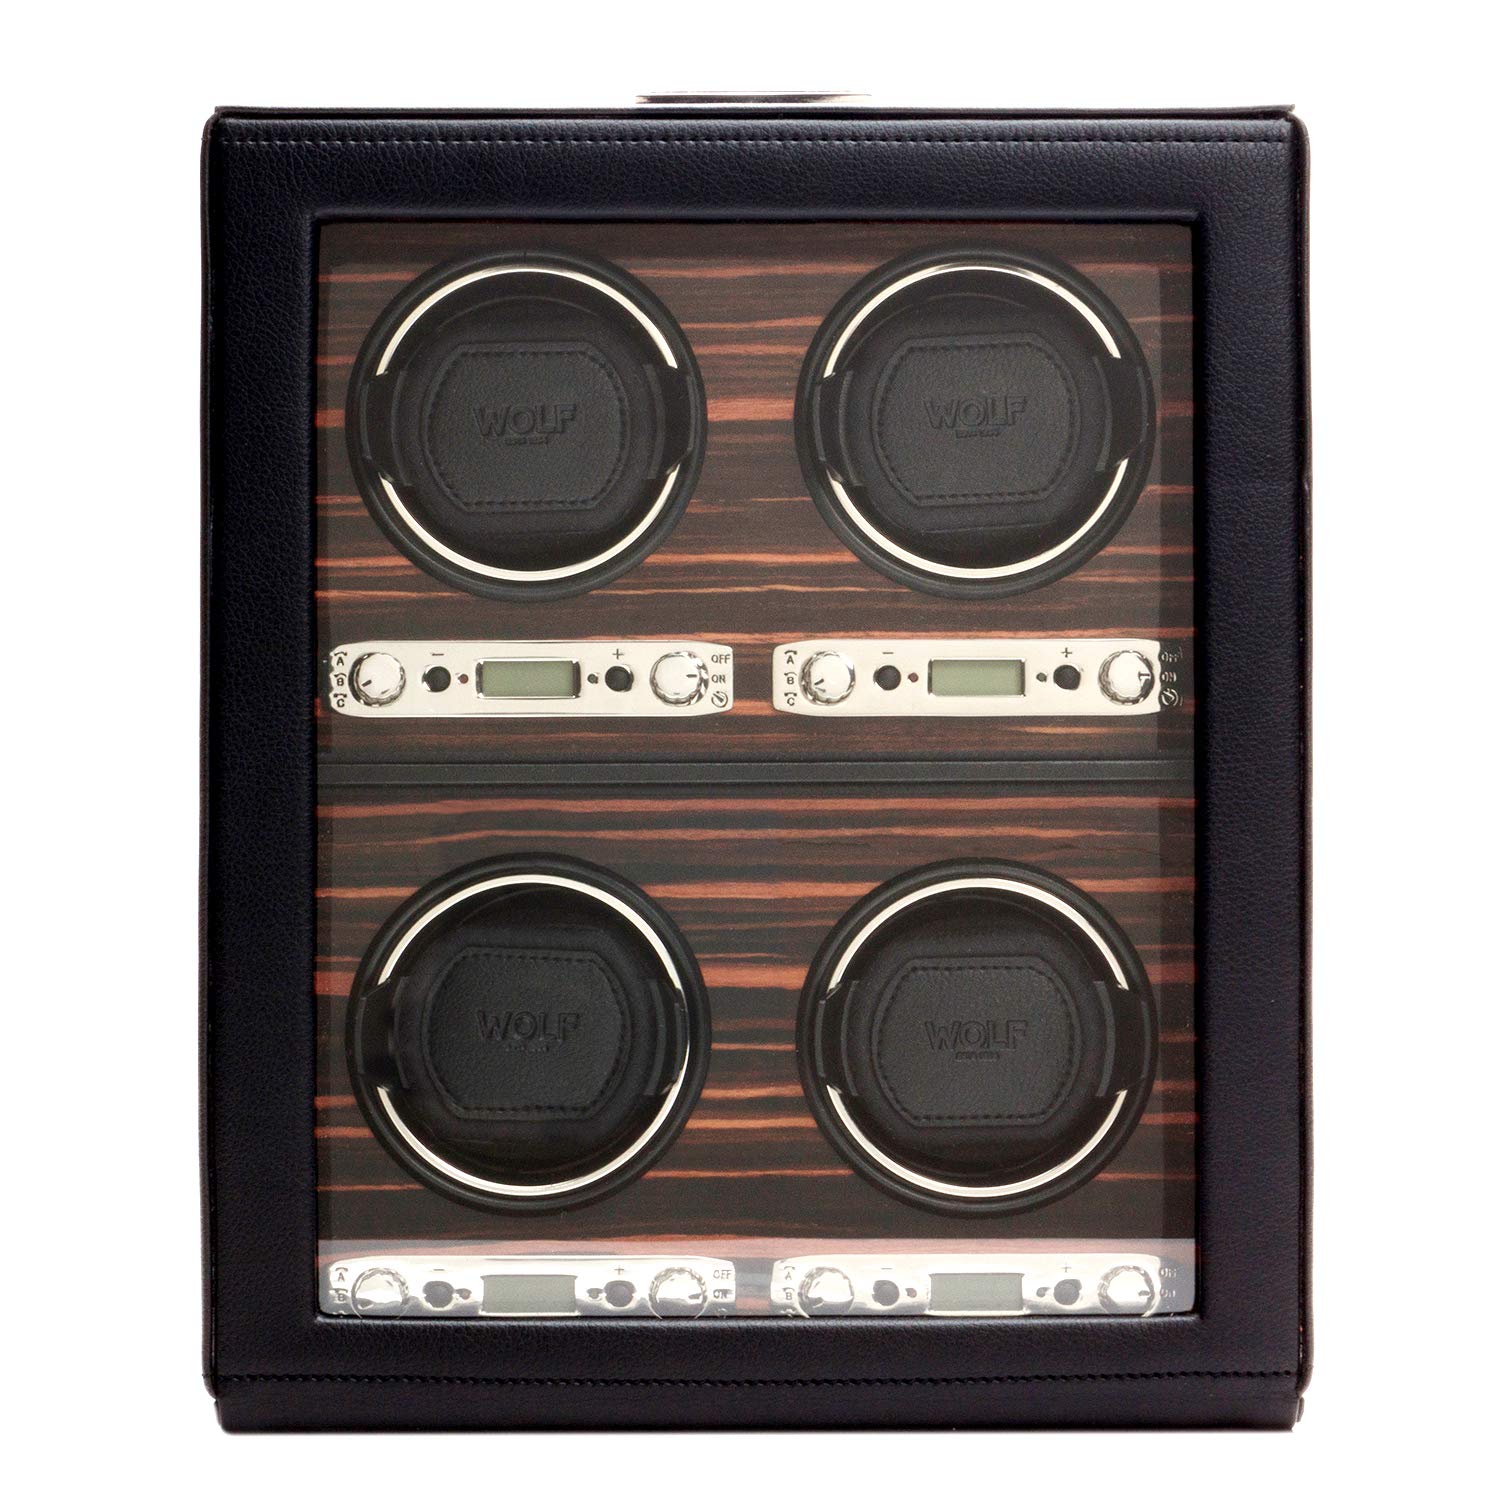 WOLF 459156 Roadster 4 Piece Watch Winder with Cover, Black